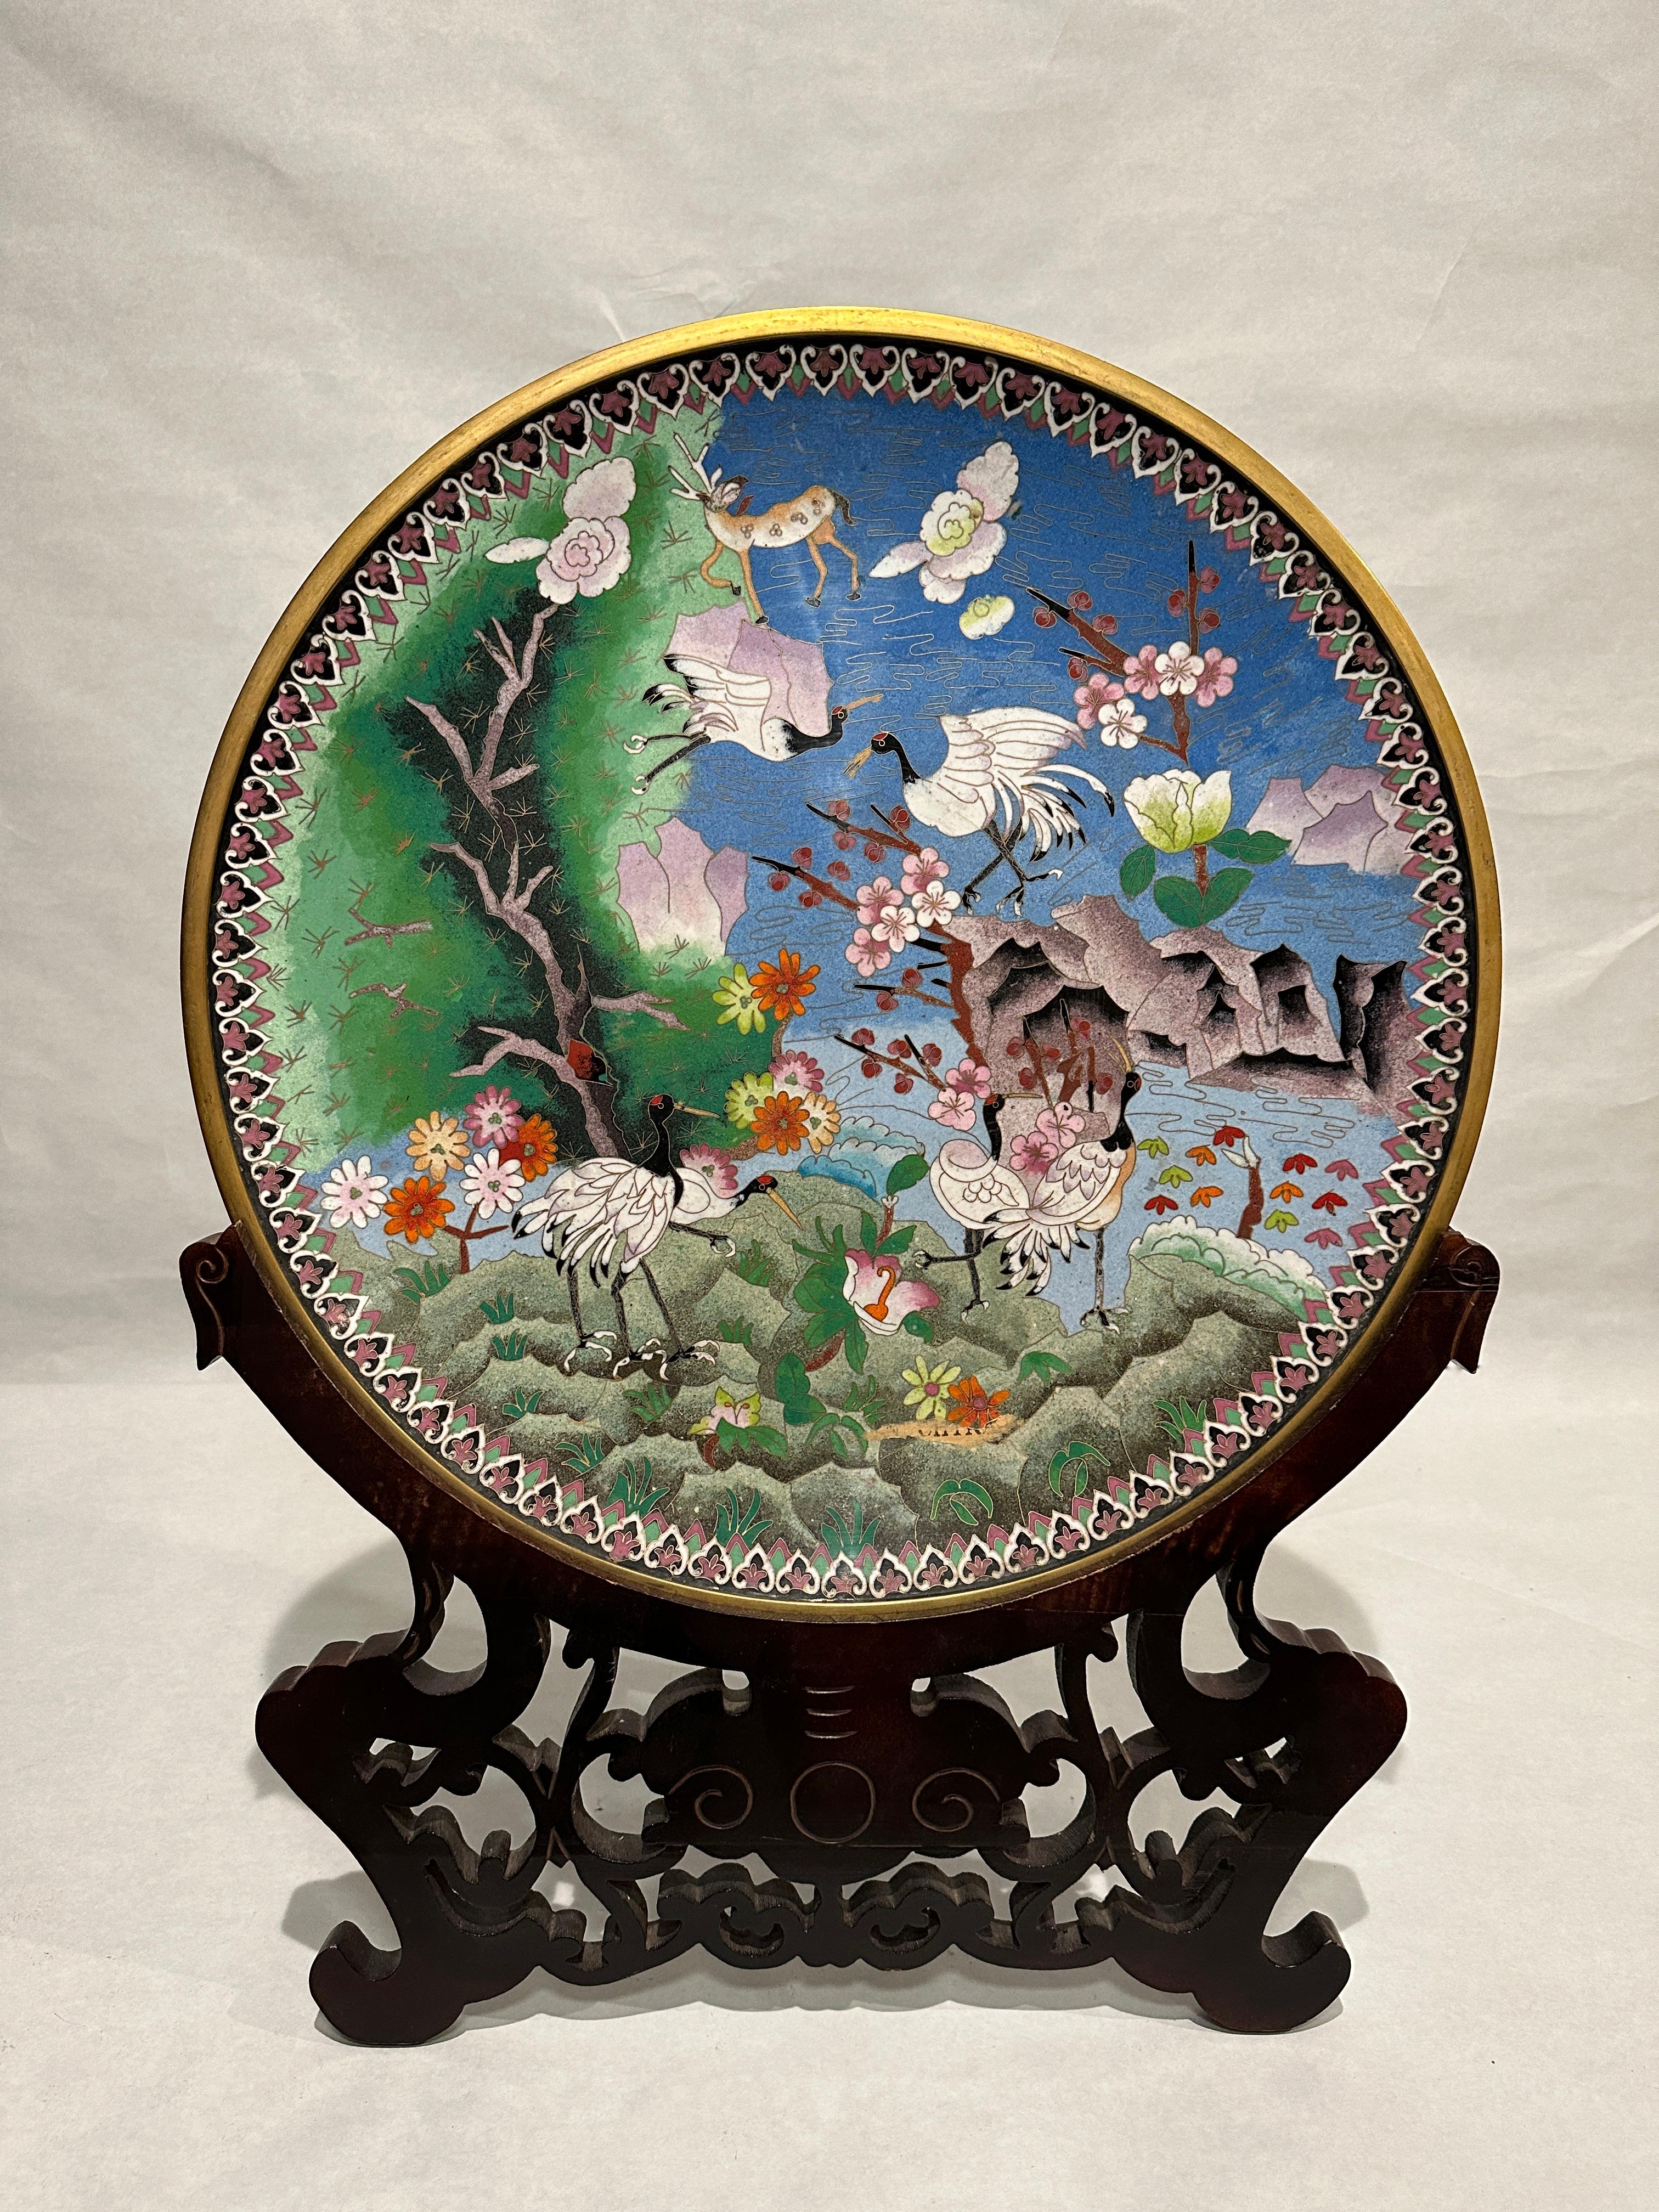 Large Chinese Qing Dynasty enamel bronze cloisonne charger. Unusual and rare bronze Chinese Qing Dynasty Cloisonne charger. The brightly multicolored enamel decoration features Crane birds and many colorful florals, trees, cherry blossoms and